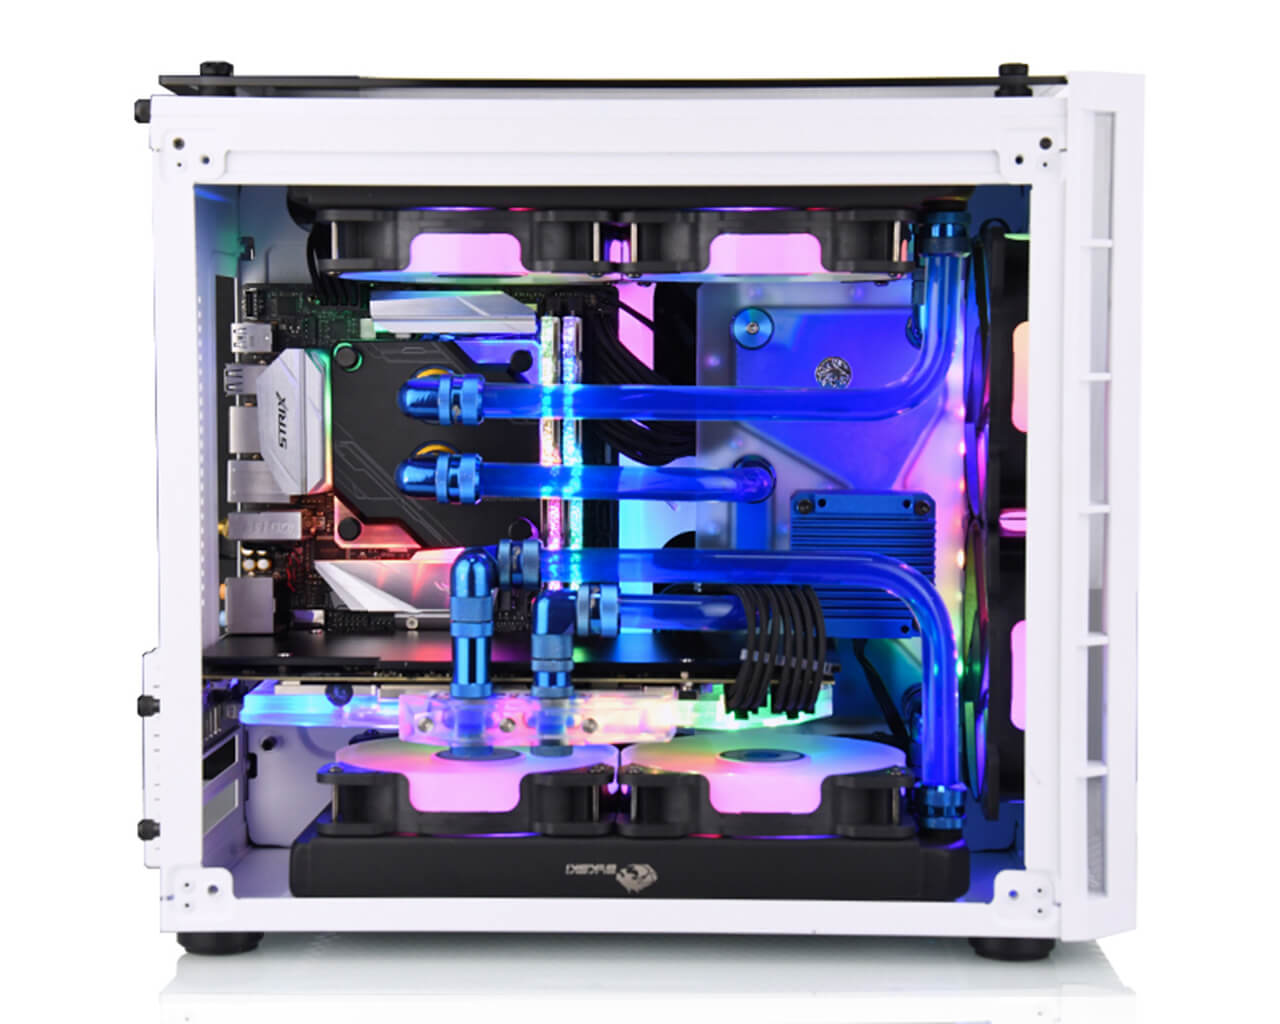 Bykski Distro Plate For CORSAIR 280X - Frosted PMMA w/ 5v Addressable RGB (RBW) - Pump Included (RGV-COS-280X-P)